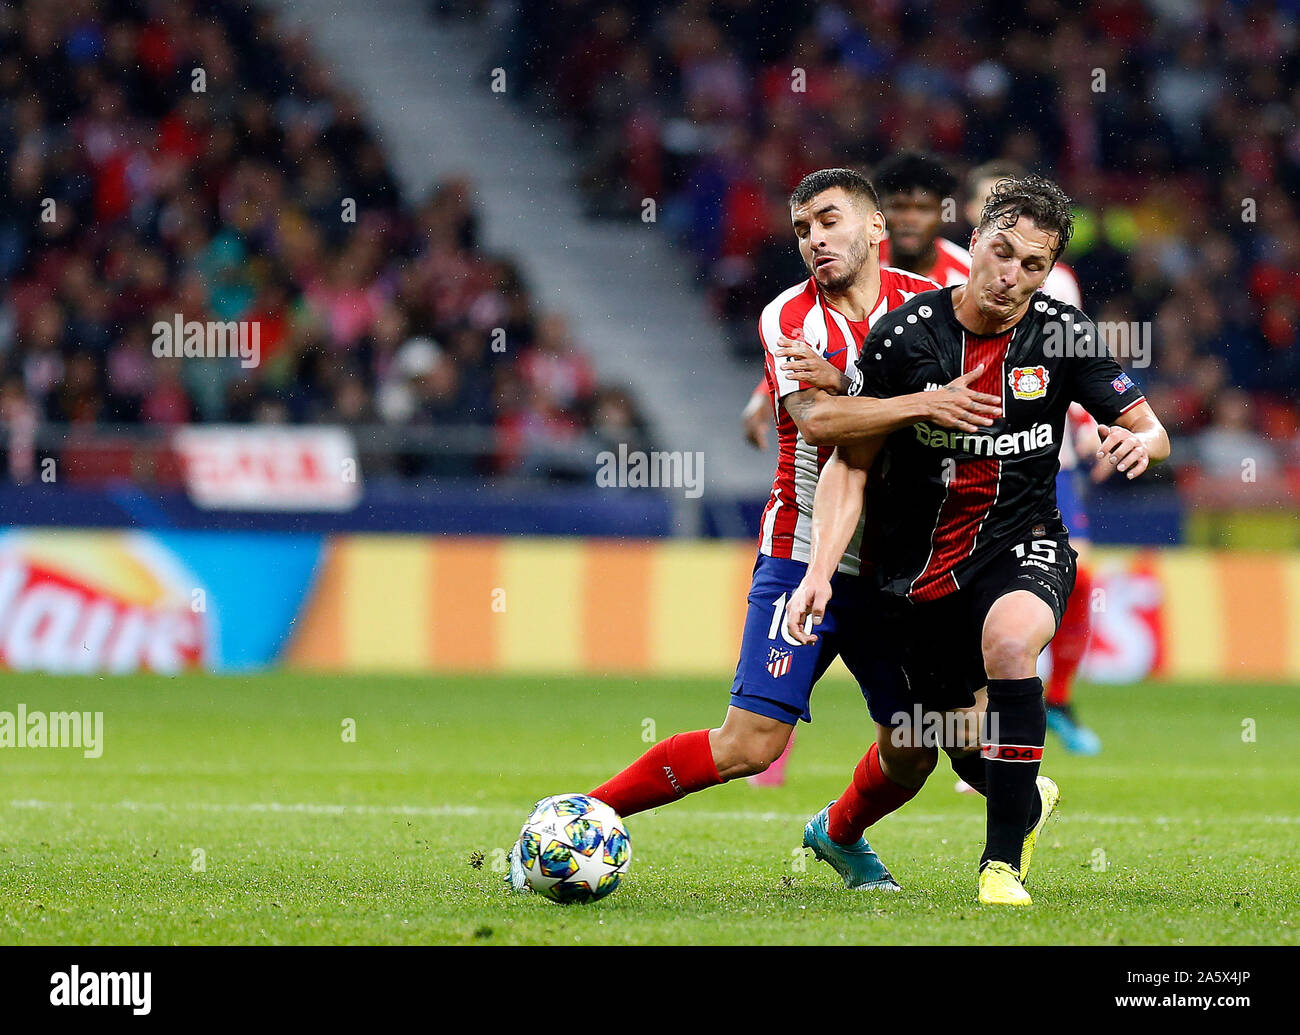 Madrid, Spain. 22nd Oct, 2019. Atletico de Madrid's Angel Correa and Bayern 04 Leverkusen's Julian Baumgartlinger are seen in action during the UEFA Champions League match between Atletico de Madrid and Bayern 04 Leverkusen at the Wanda Metropolitano in Madrid.(Final score; Atletico de Madrid 1:0 Bayern 04 Leverkusen) Credit: SOPA Images Limited/Alamy Live News Stock Photo